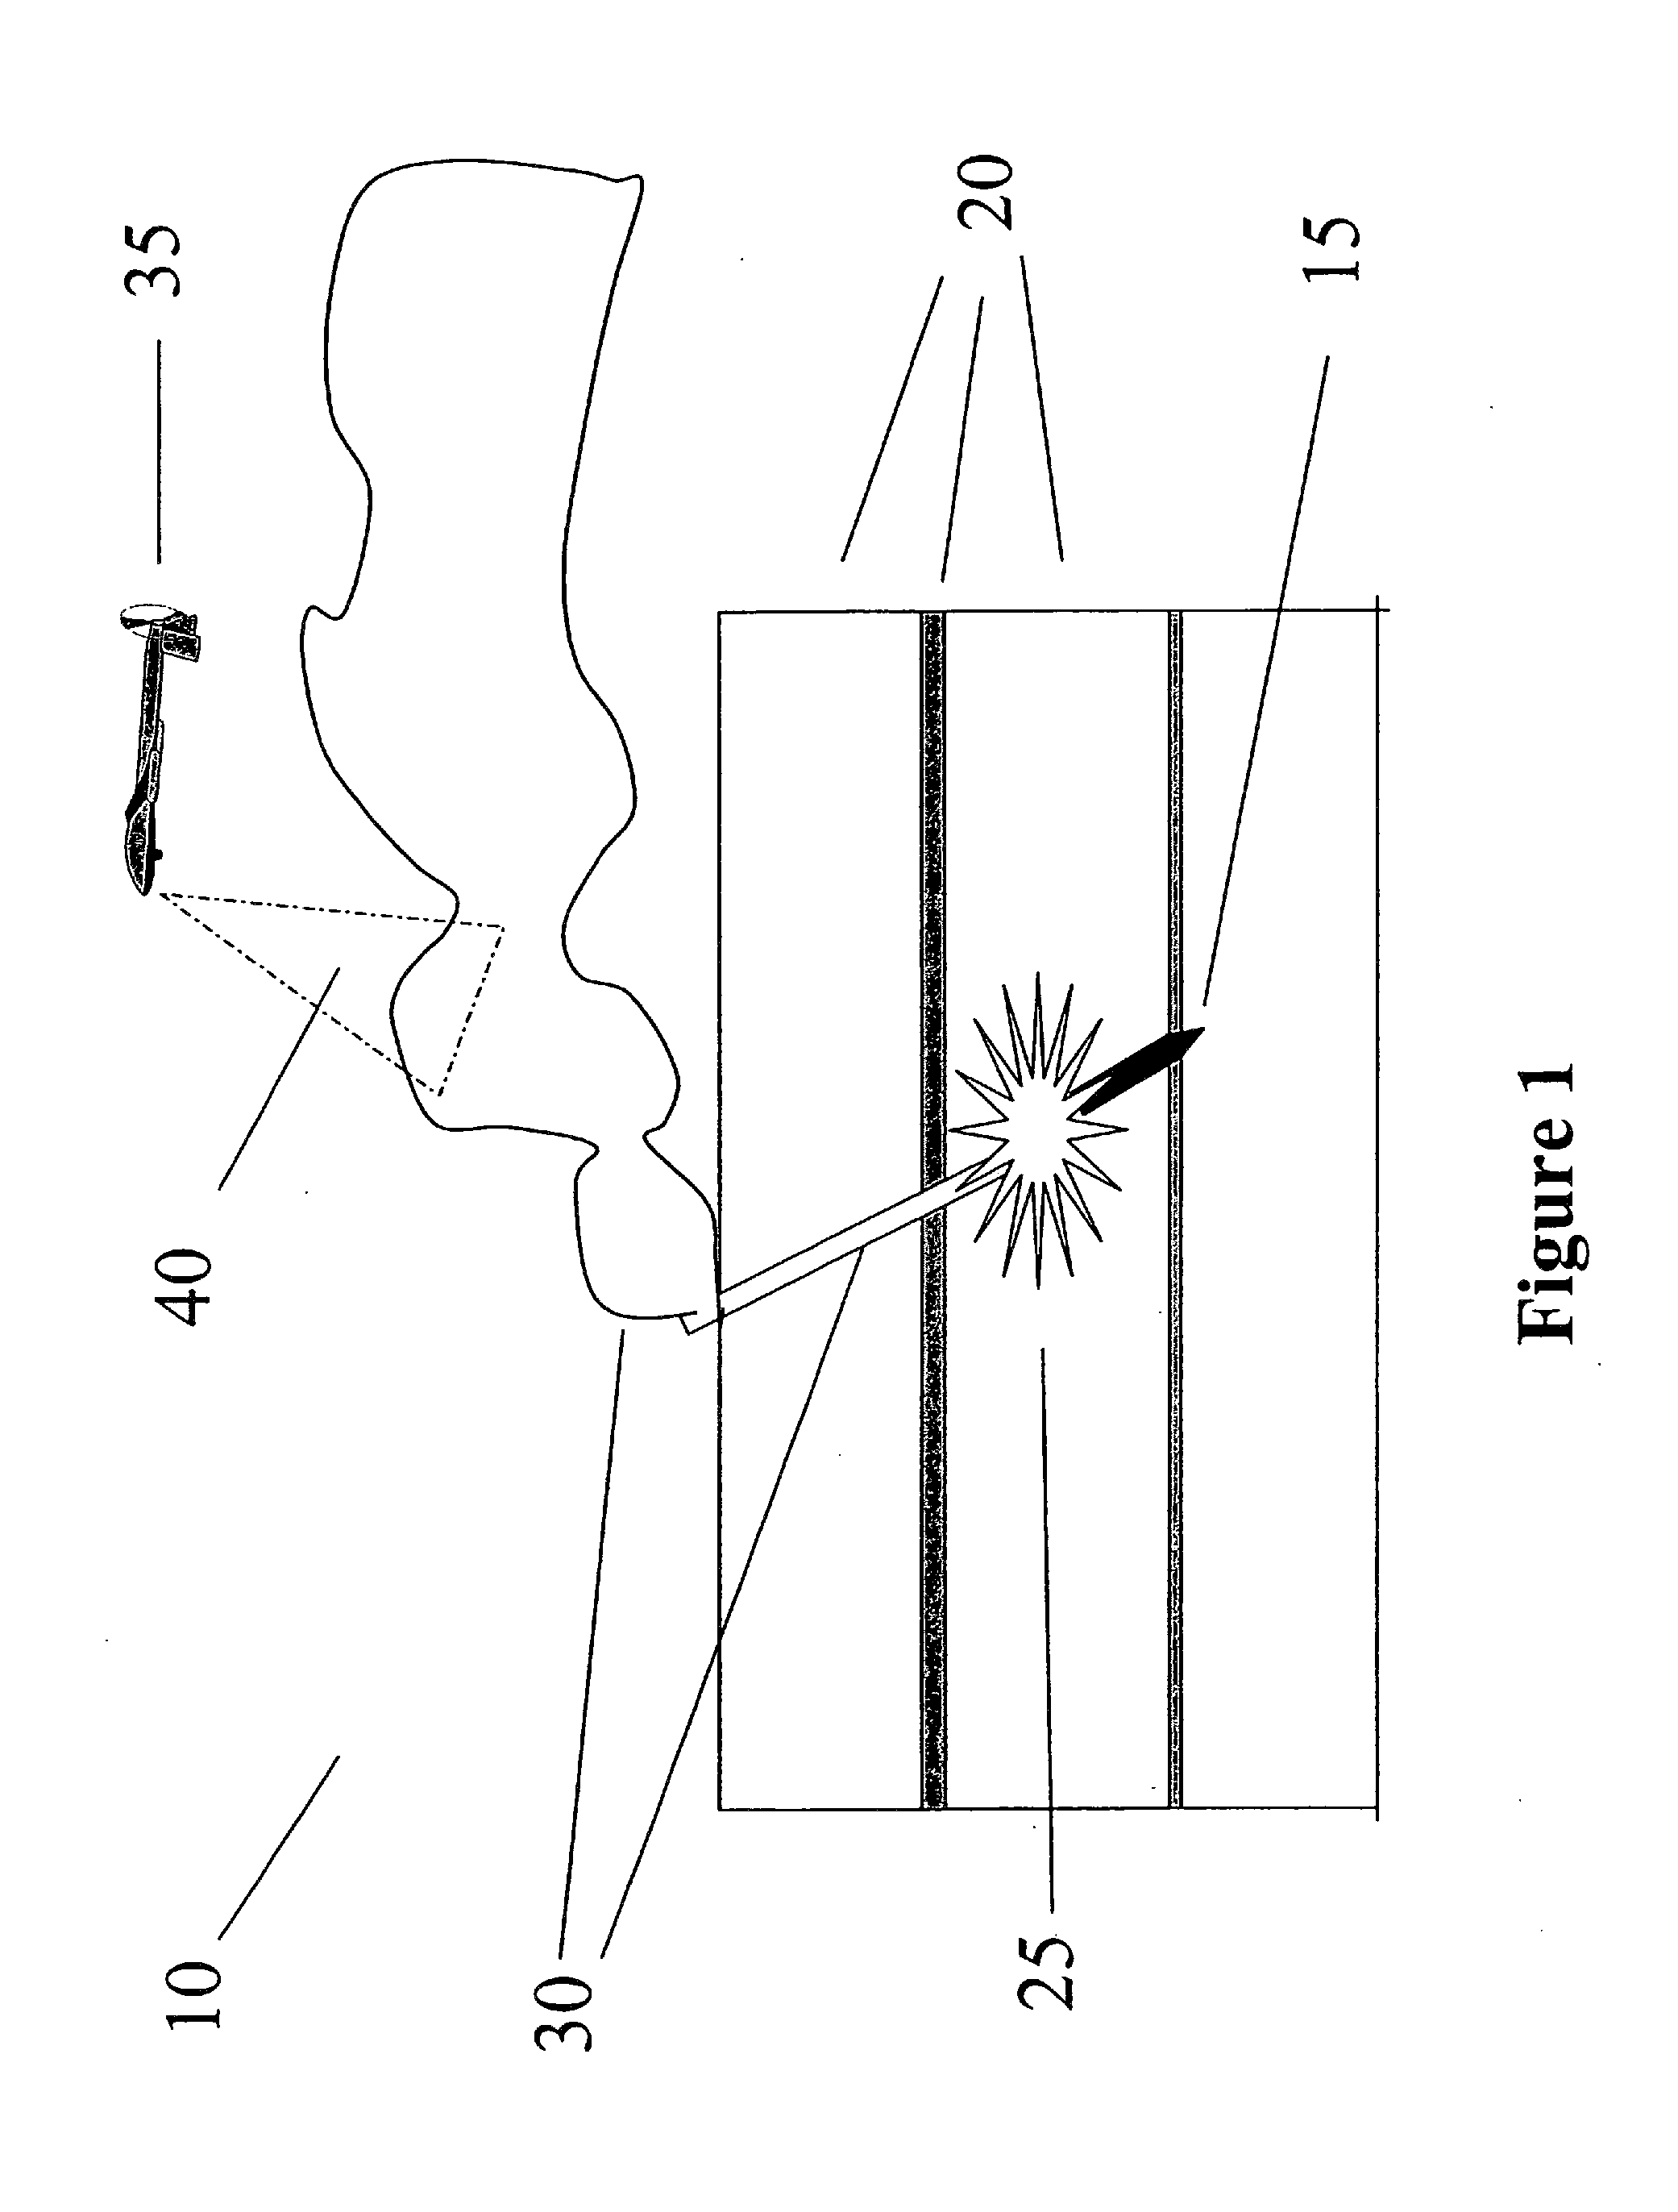 Method and System For Detection Using Nanodot Taggants